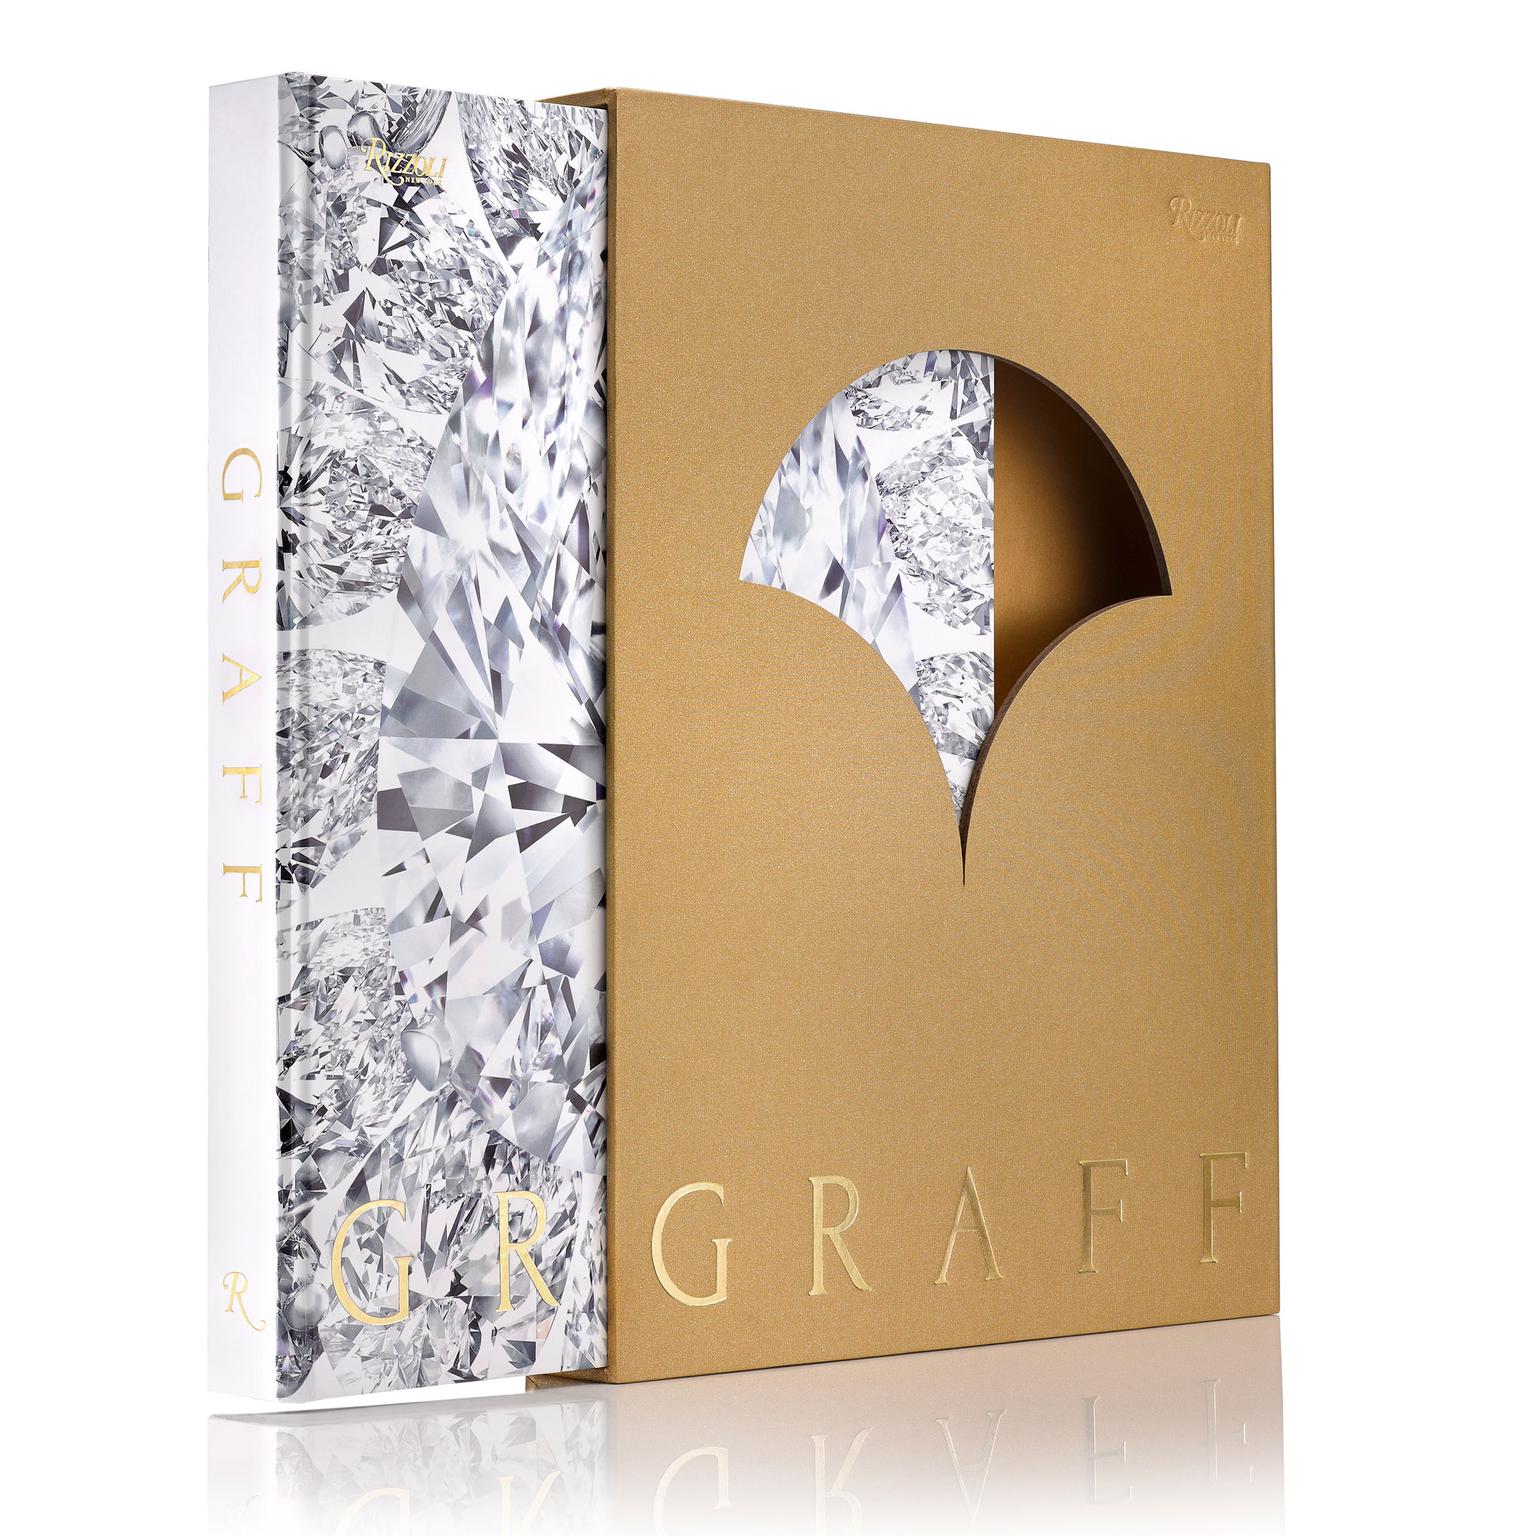 Graff jewellery coffee table book with slipcase